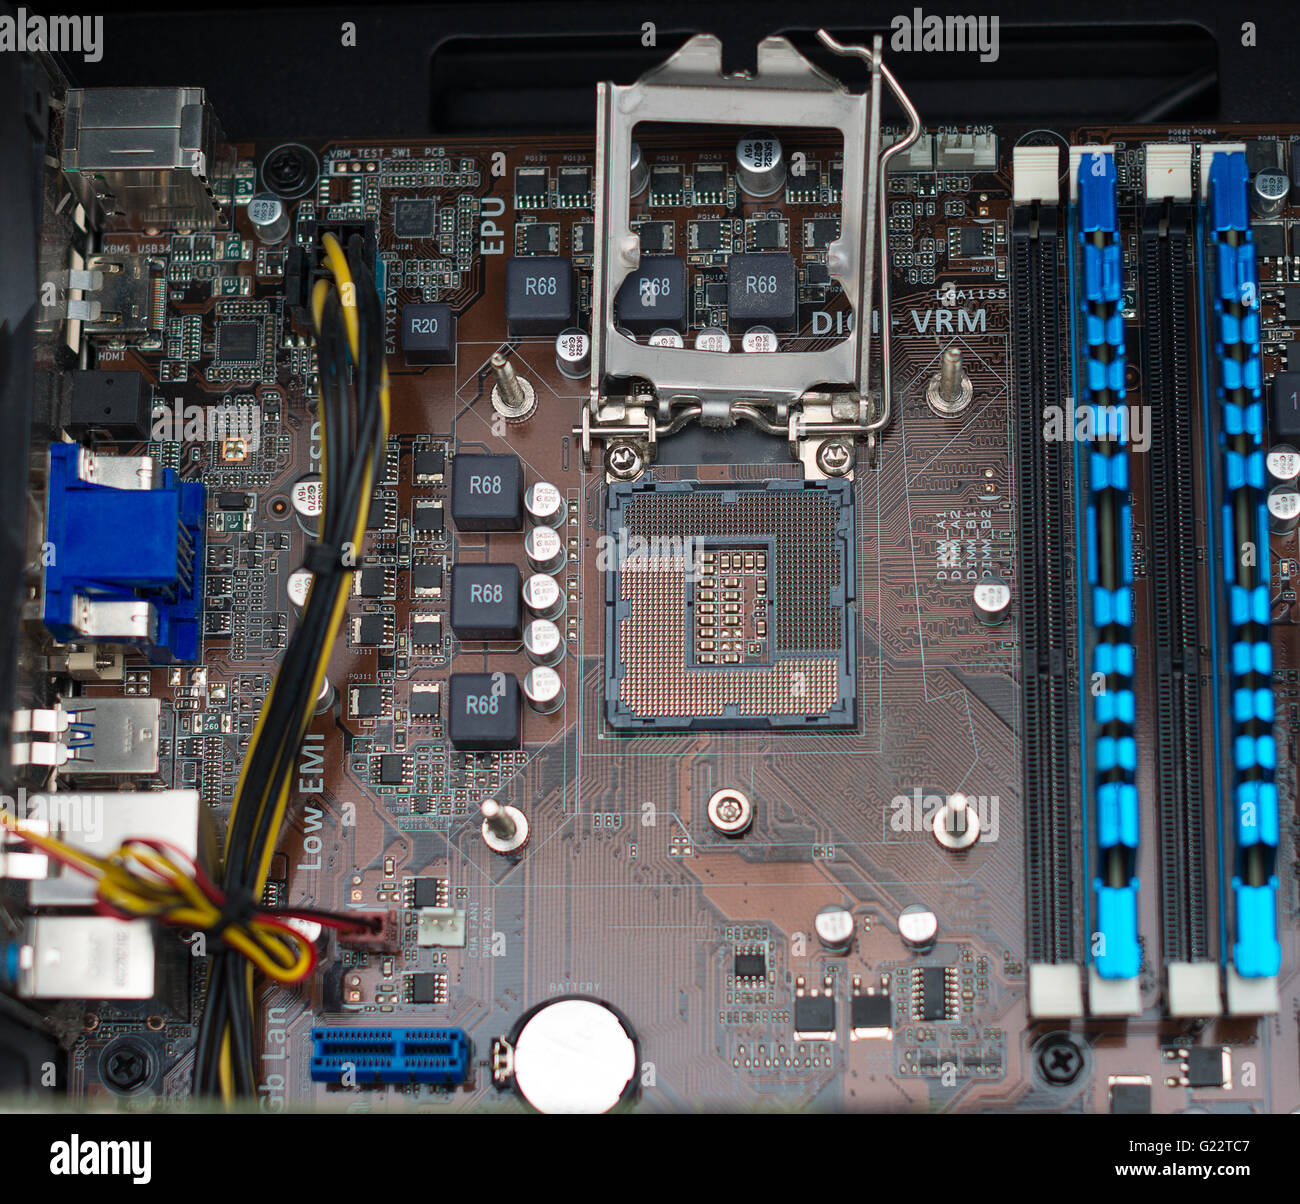 Inside of pc. Motherboard, CPU socket and RAM memory Stock Photo - Alamy